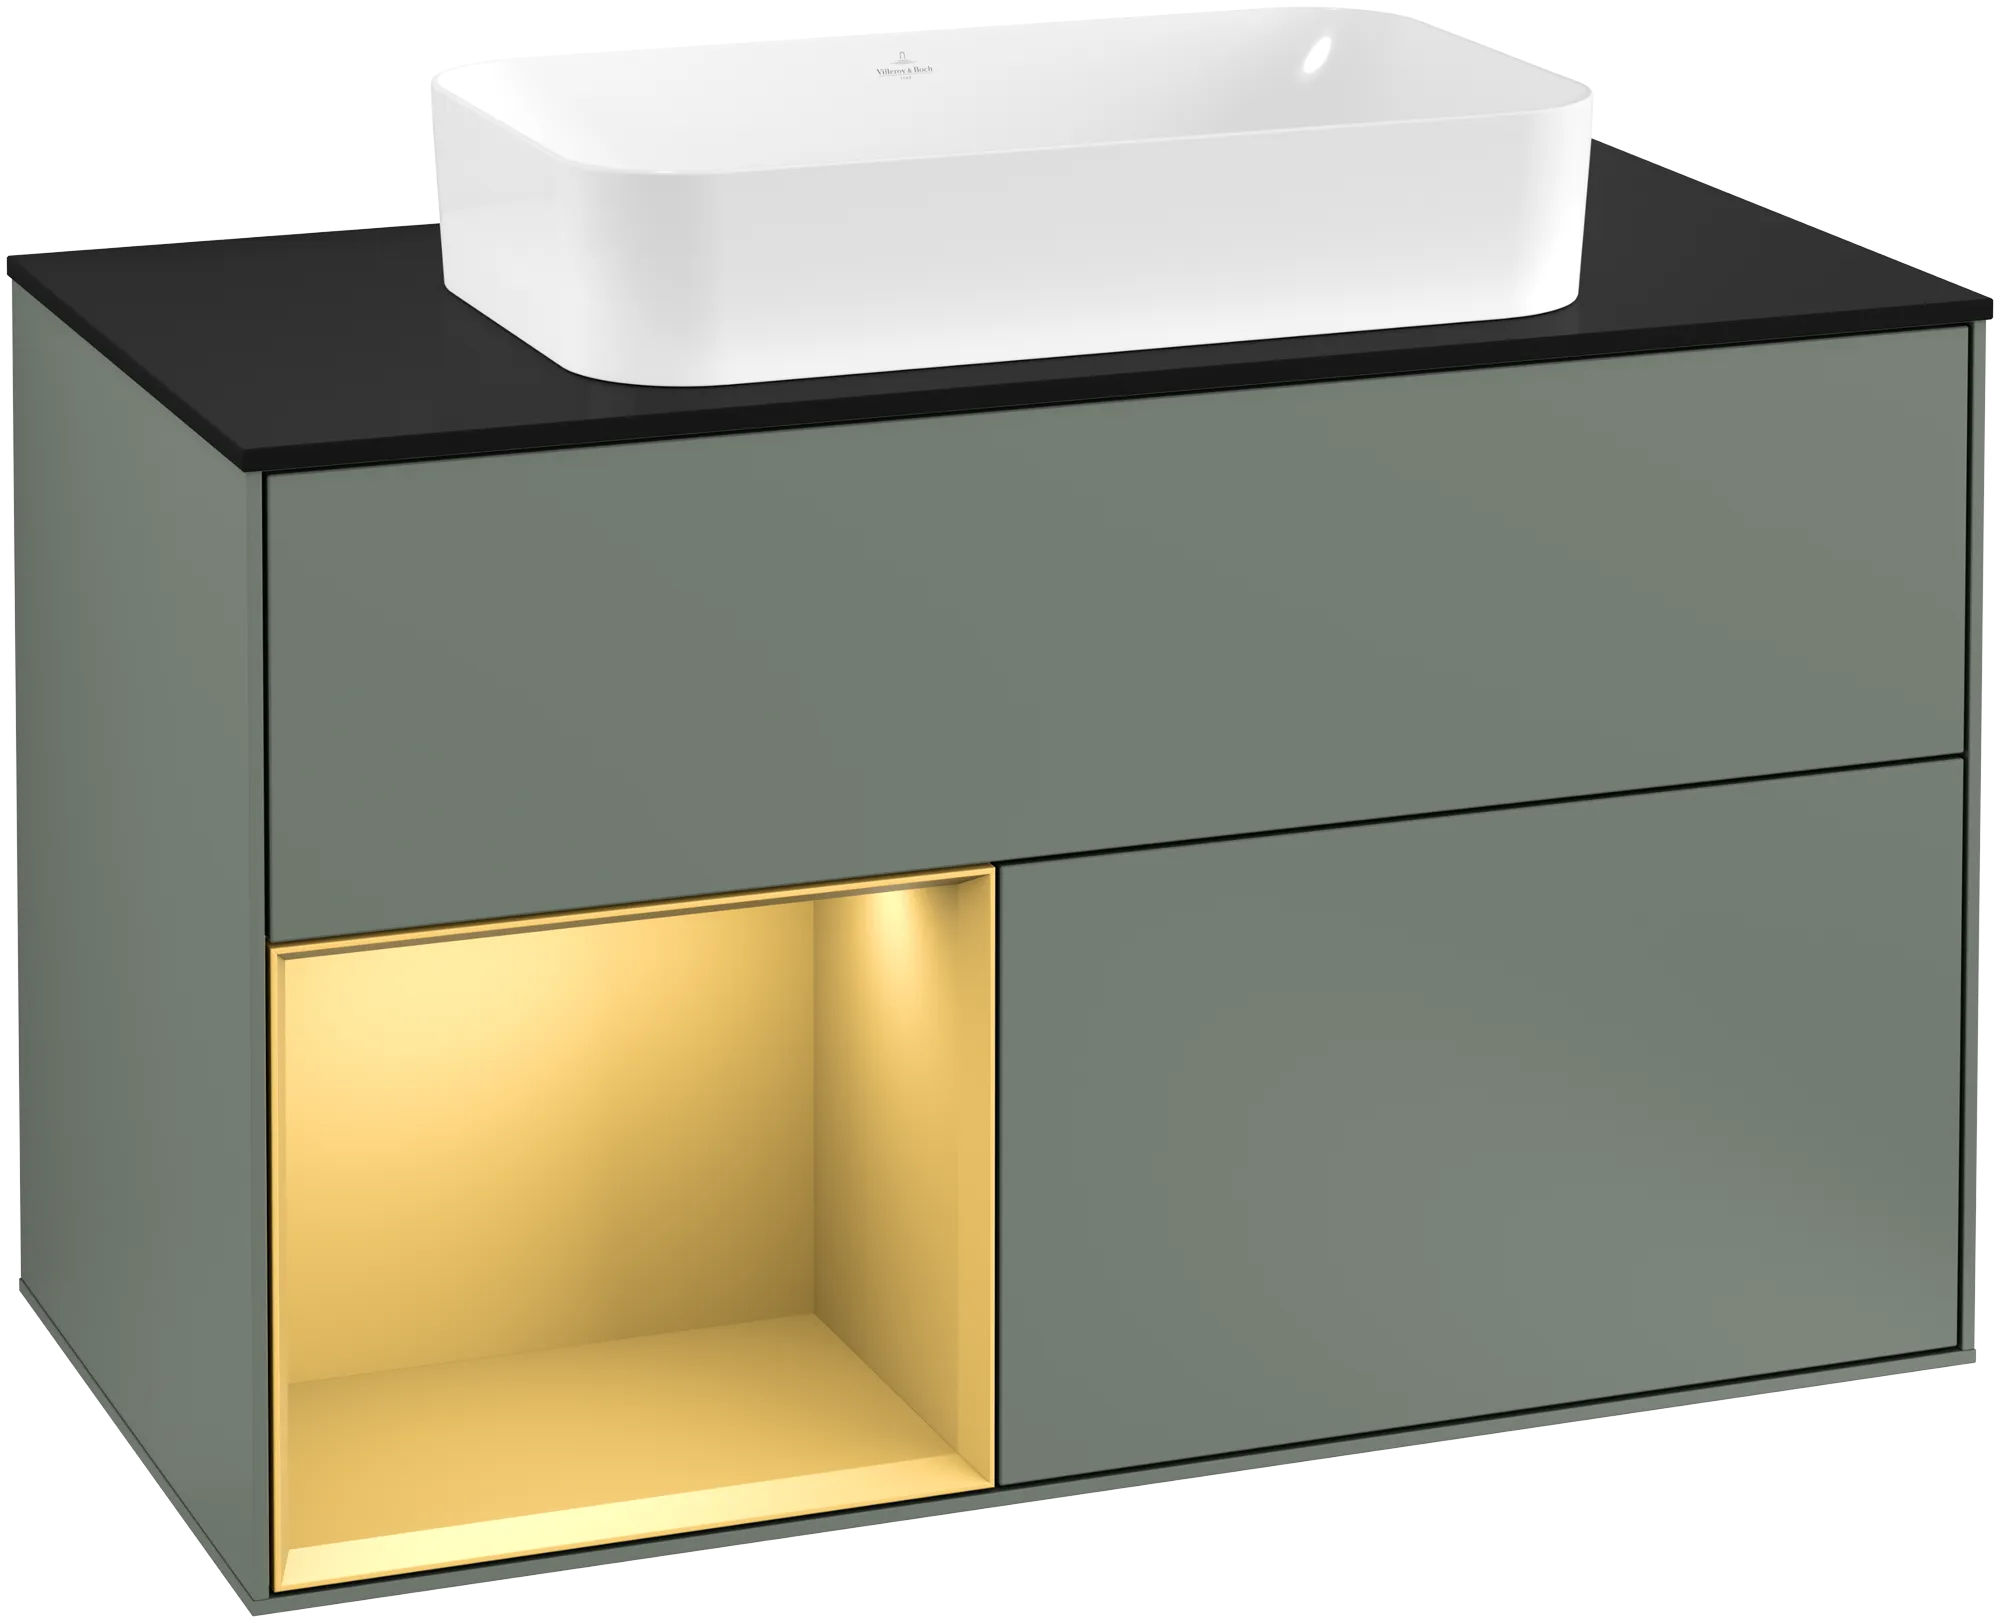 Picture of VILLEROY BOCH Finion Vanity unit, with lighting, 2 pull-out compartments, 1000 x 603 x 501 mm, Olive Matt Lacquer / Gold Matt Lacquer / Glass Black Matt #G242HFGM